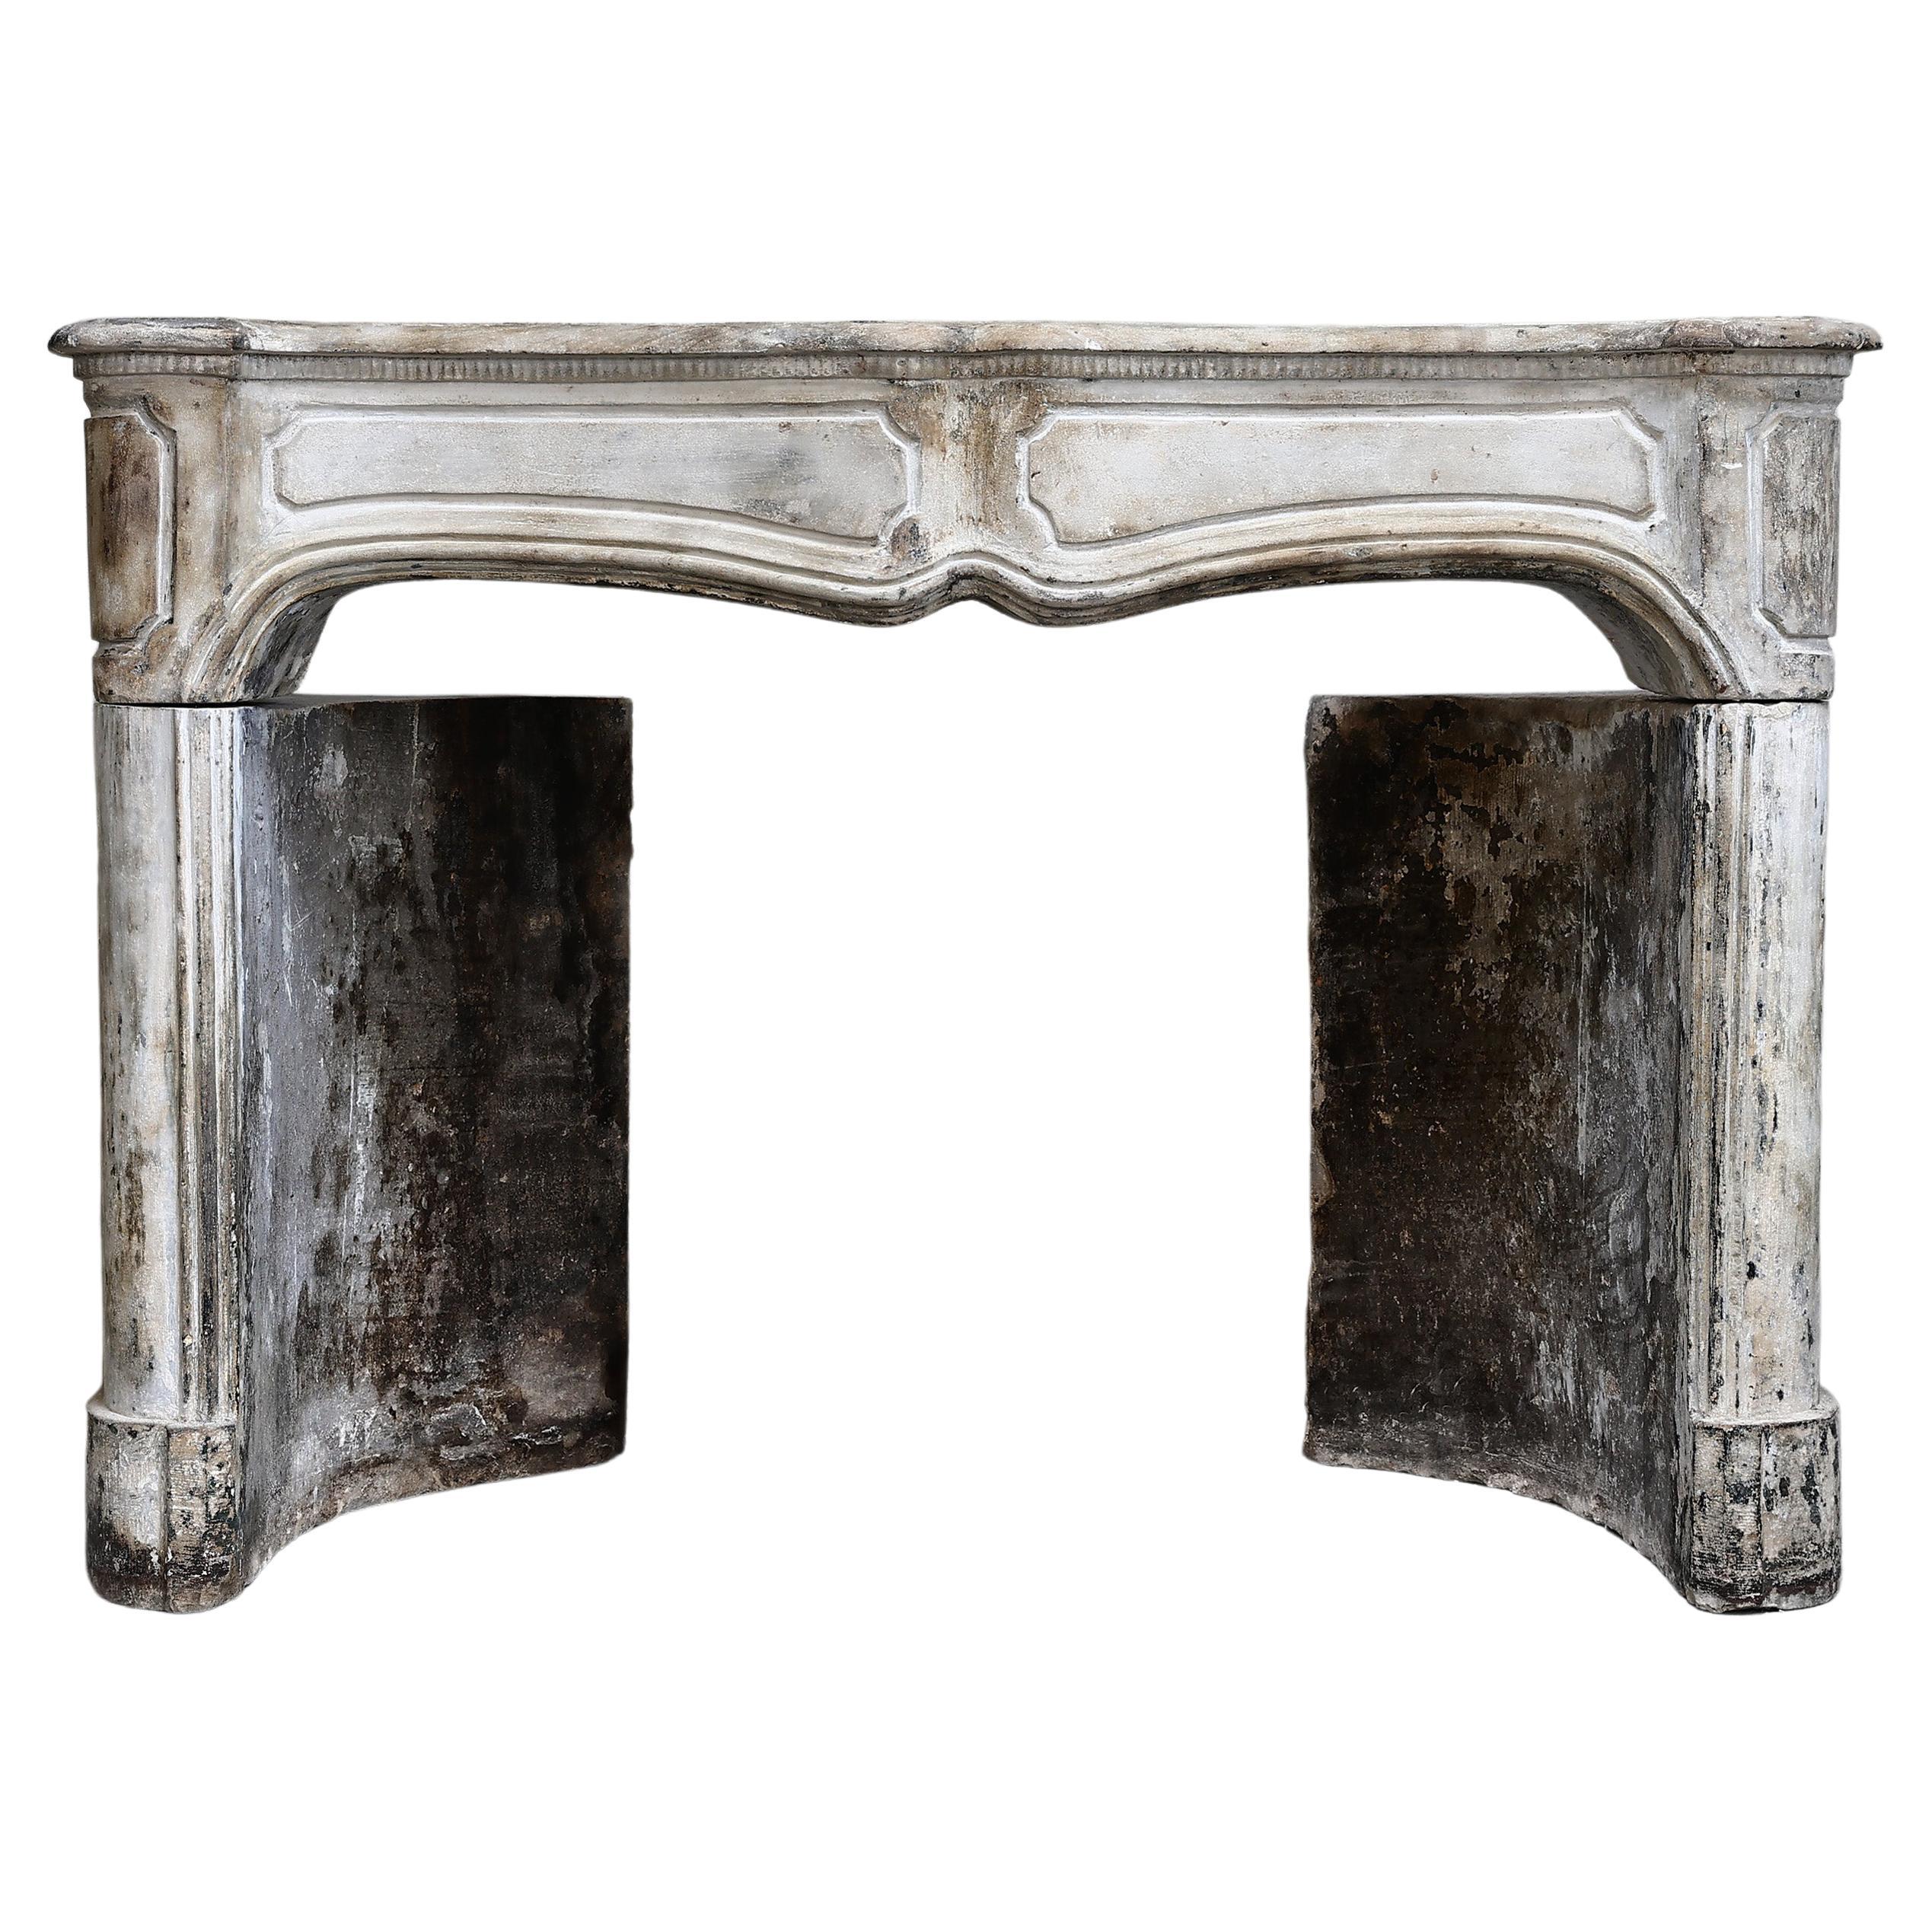 18th Century Fireplace of French Limestone in the Style of Louis XV